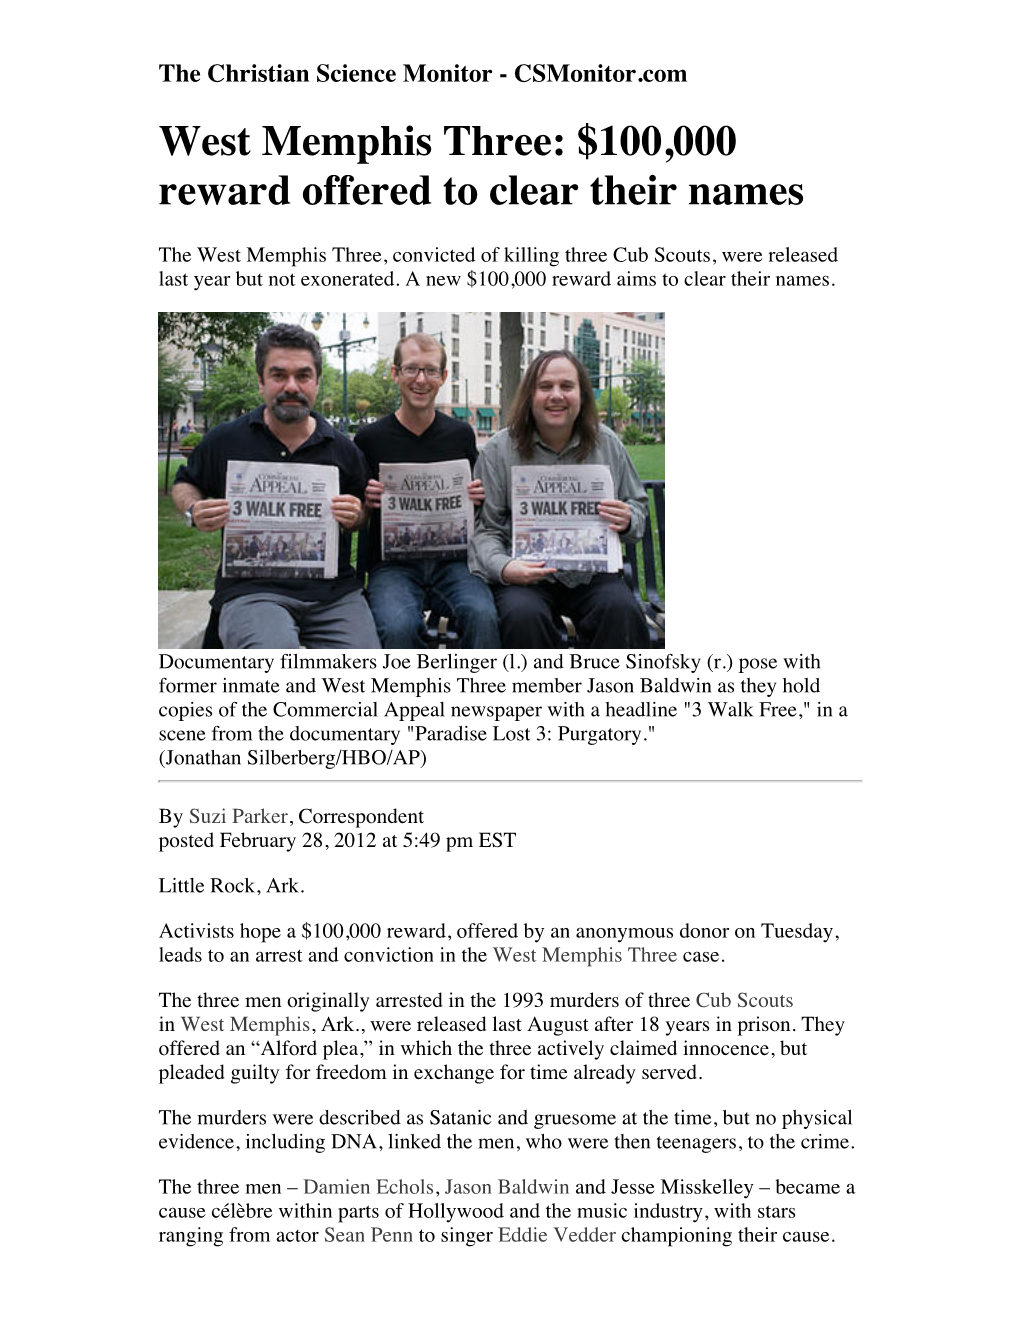 West Memphis Three: $100,000 Reward Offered to Clear Their Names